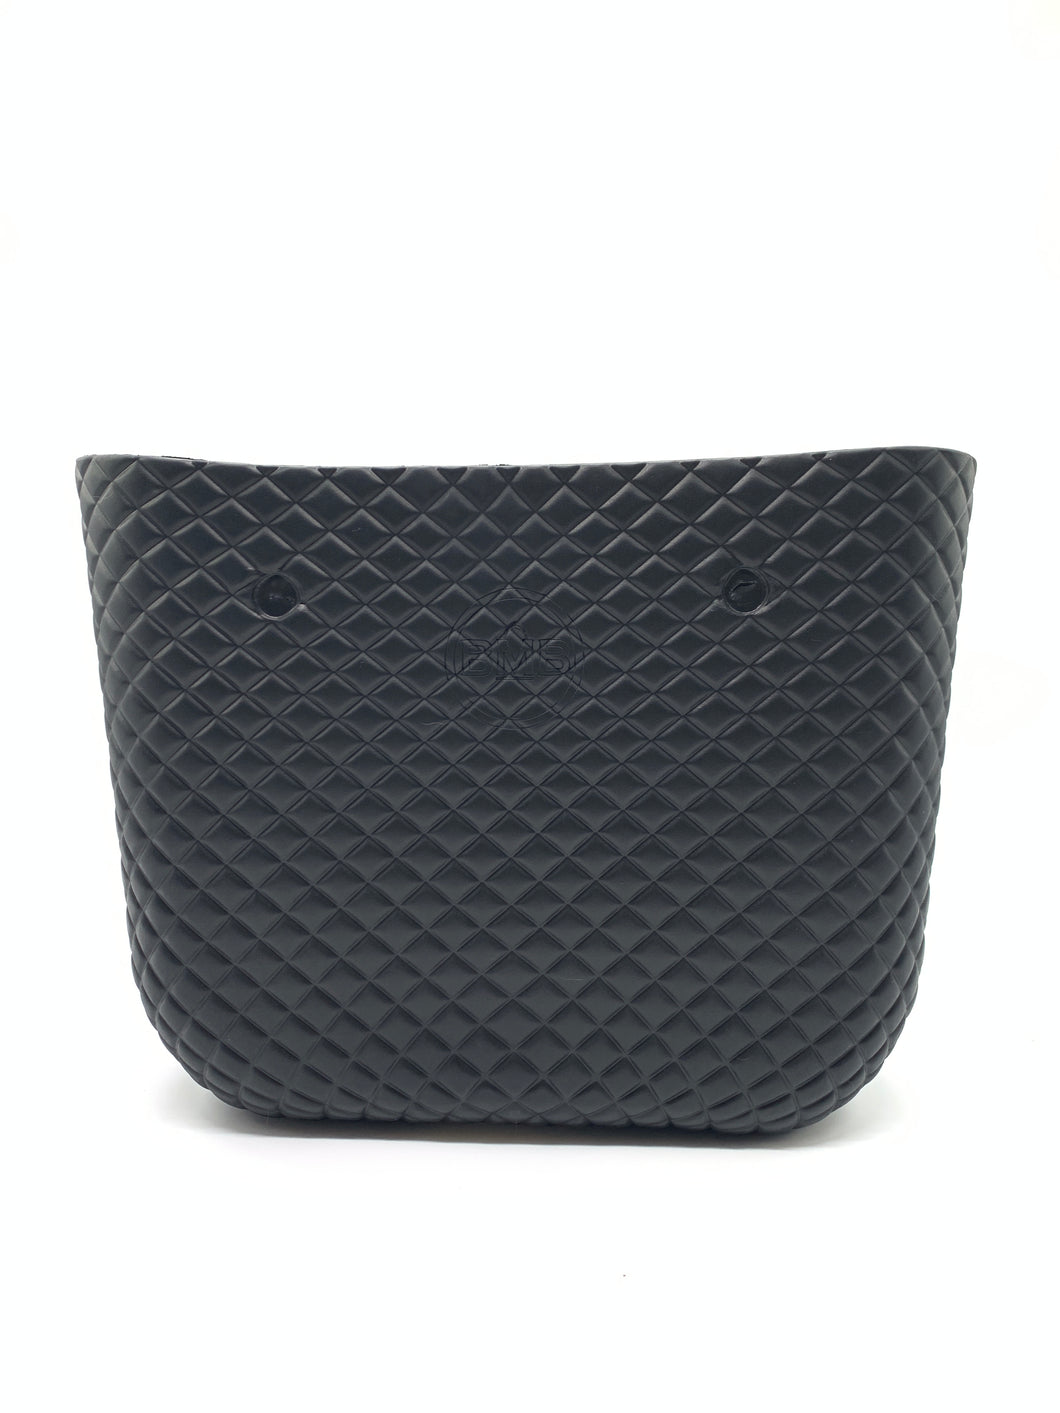 Classic Body - Waffle Style Be Me Bag - Black